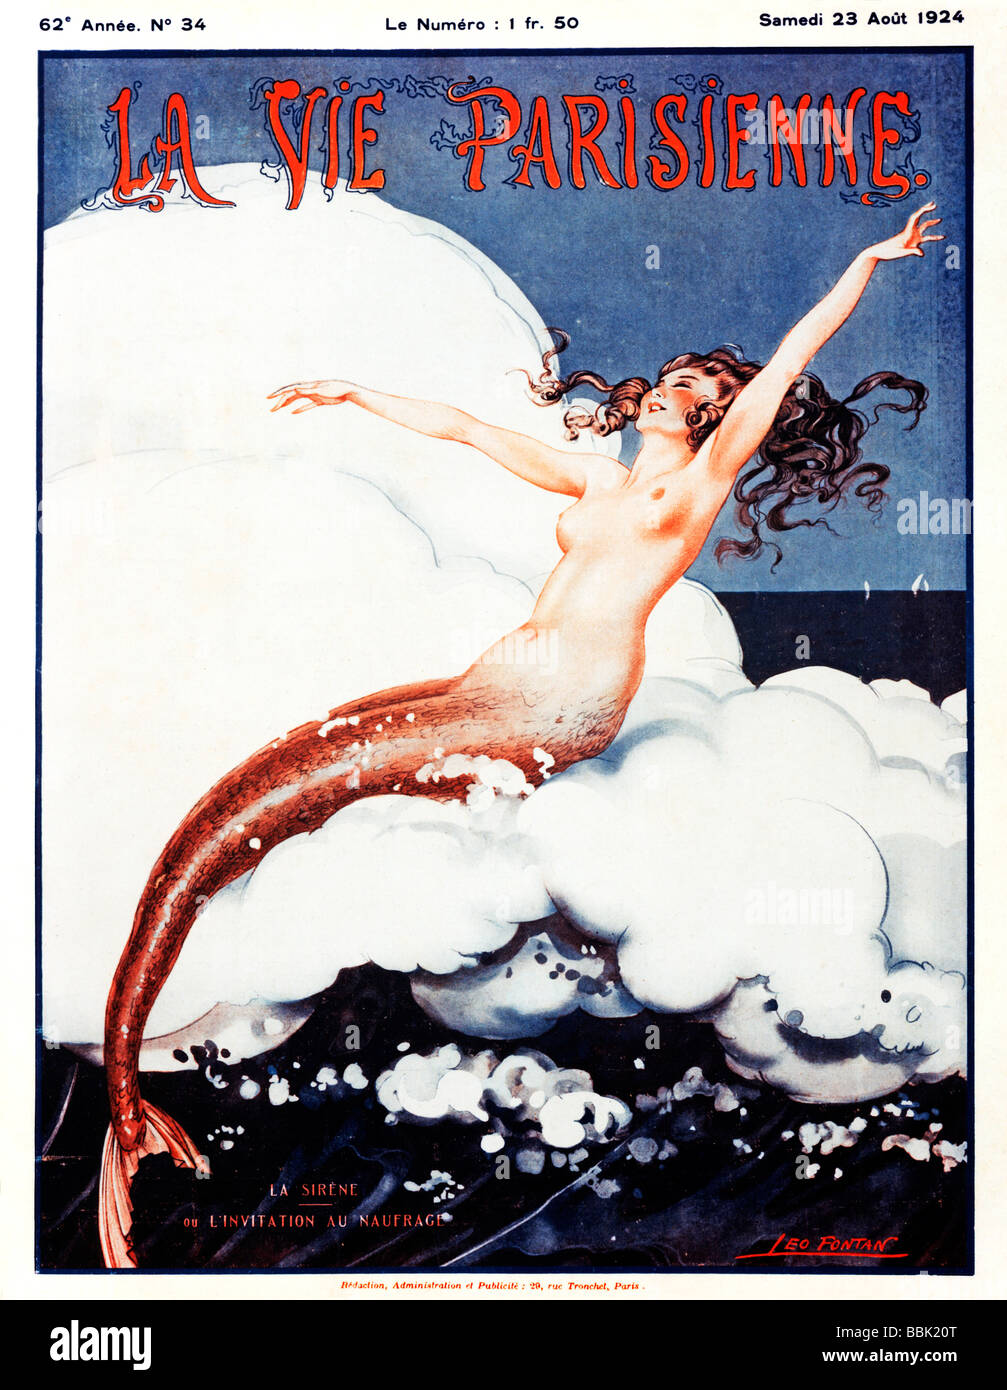 Invitation To A Shipwreck the siren calls the passing boats onto her rocks in this 1920s French illustration Stock Photo